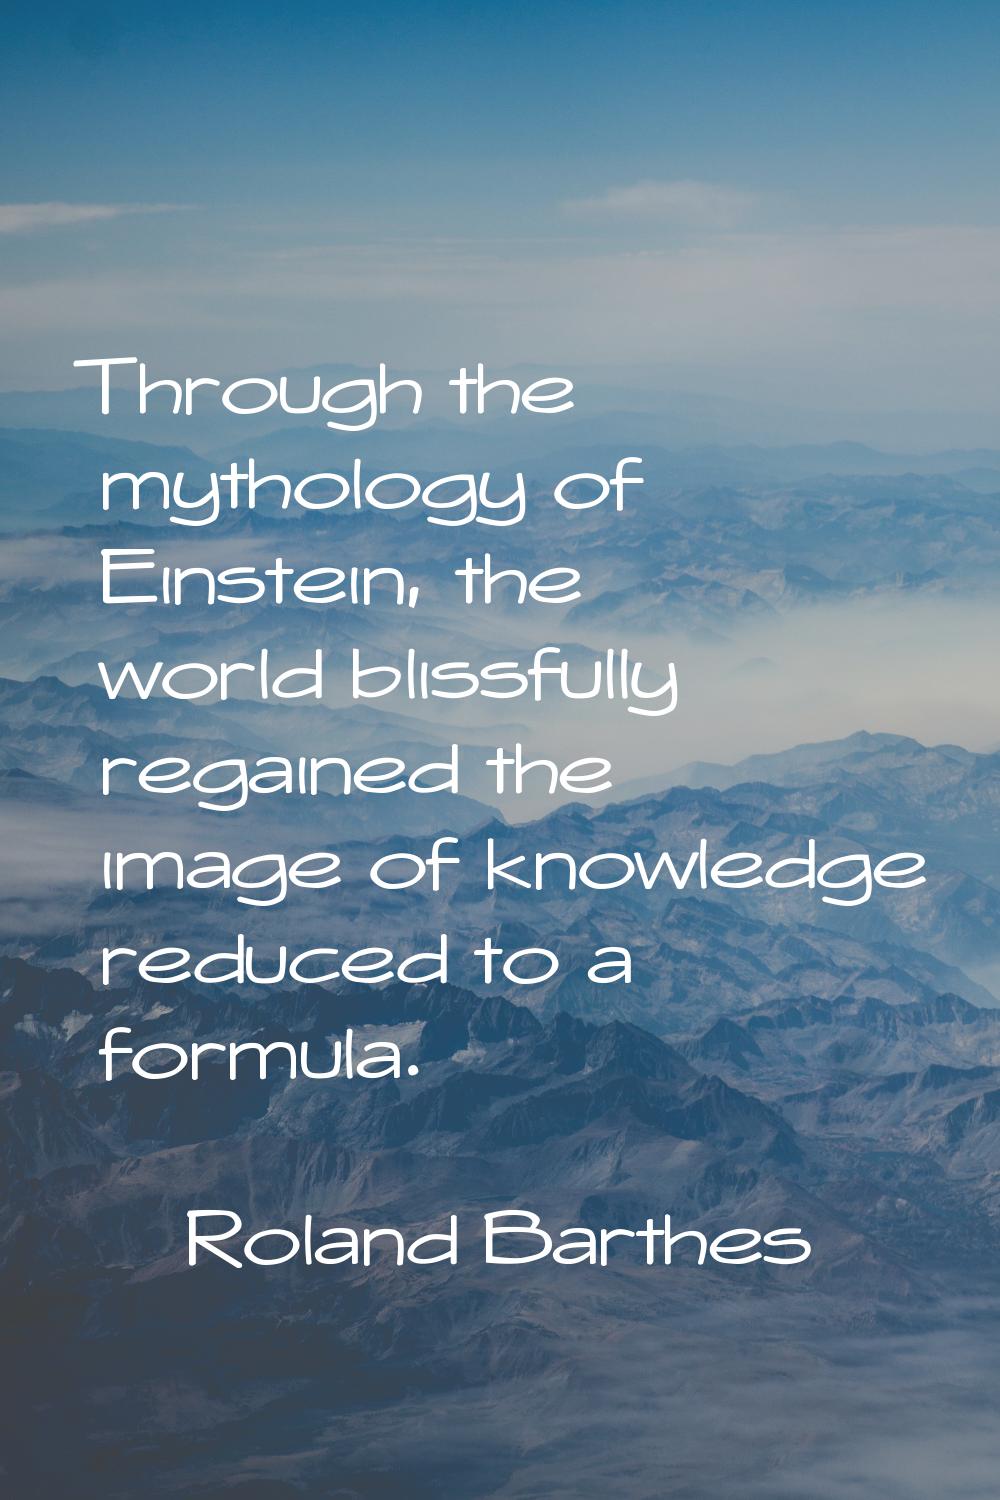 Through the mythology of Einstein, the world blissfully regained the image of knowledge reduced to 